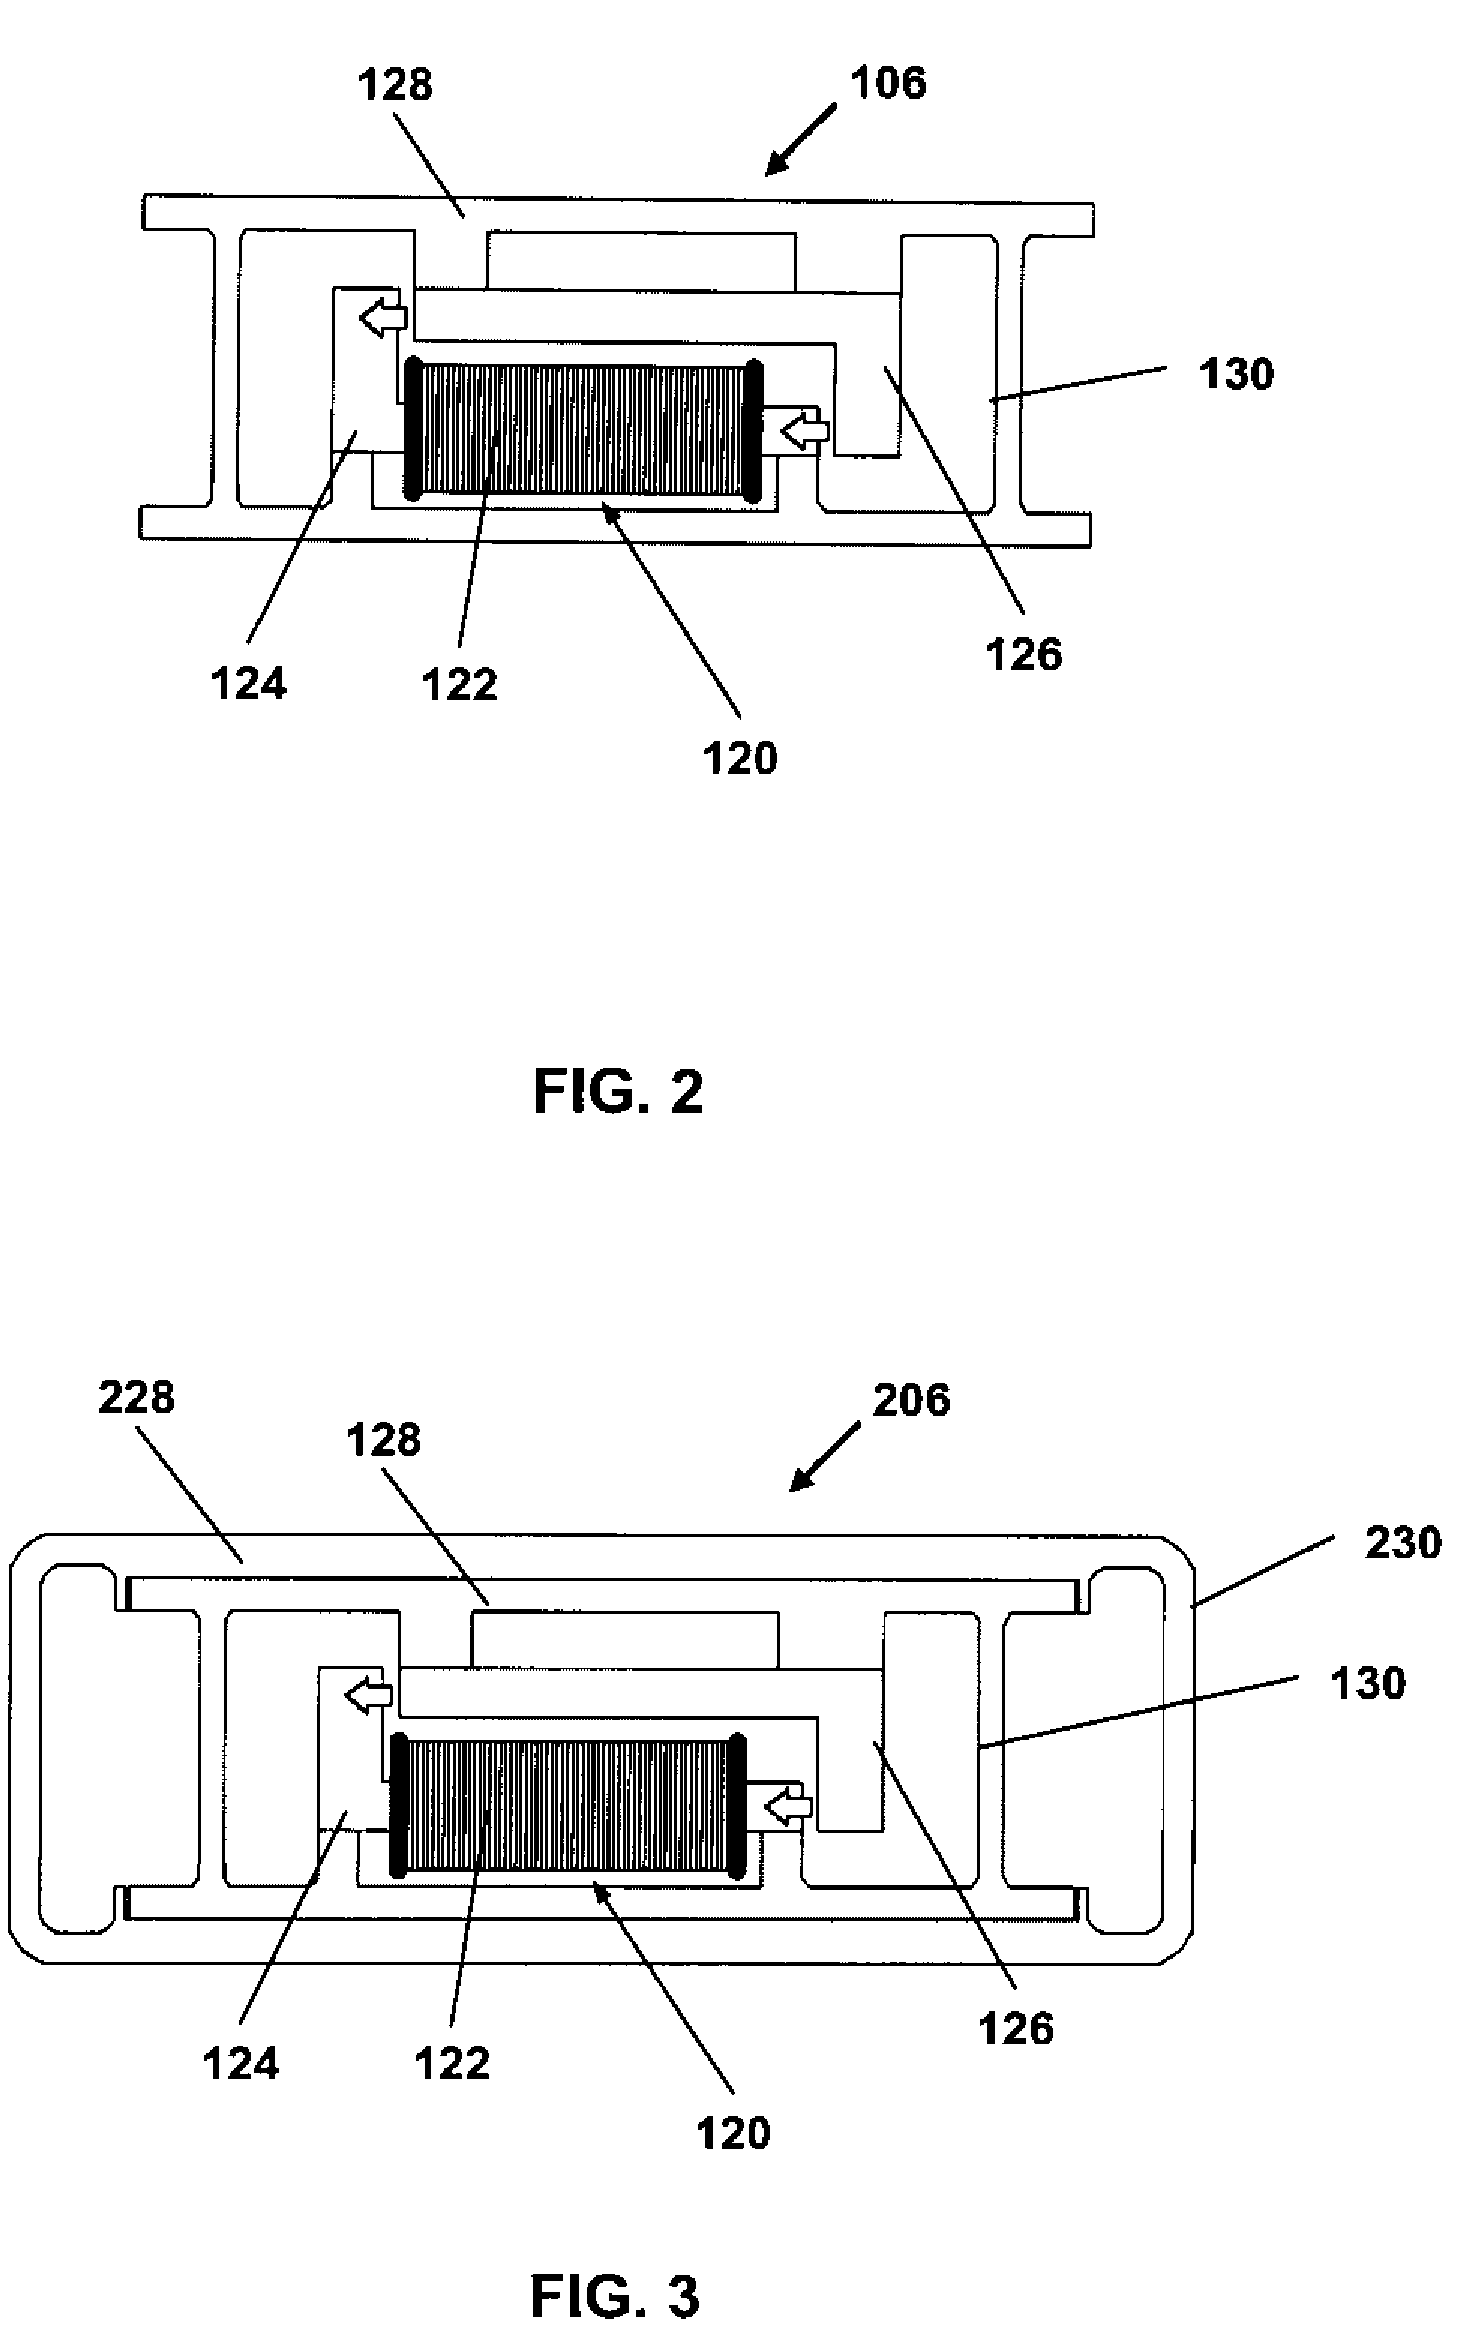 Haptic actuator assembly and method of manufacturing a haptic actuator assembly